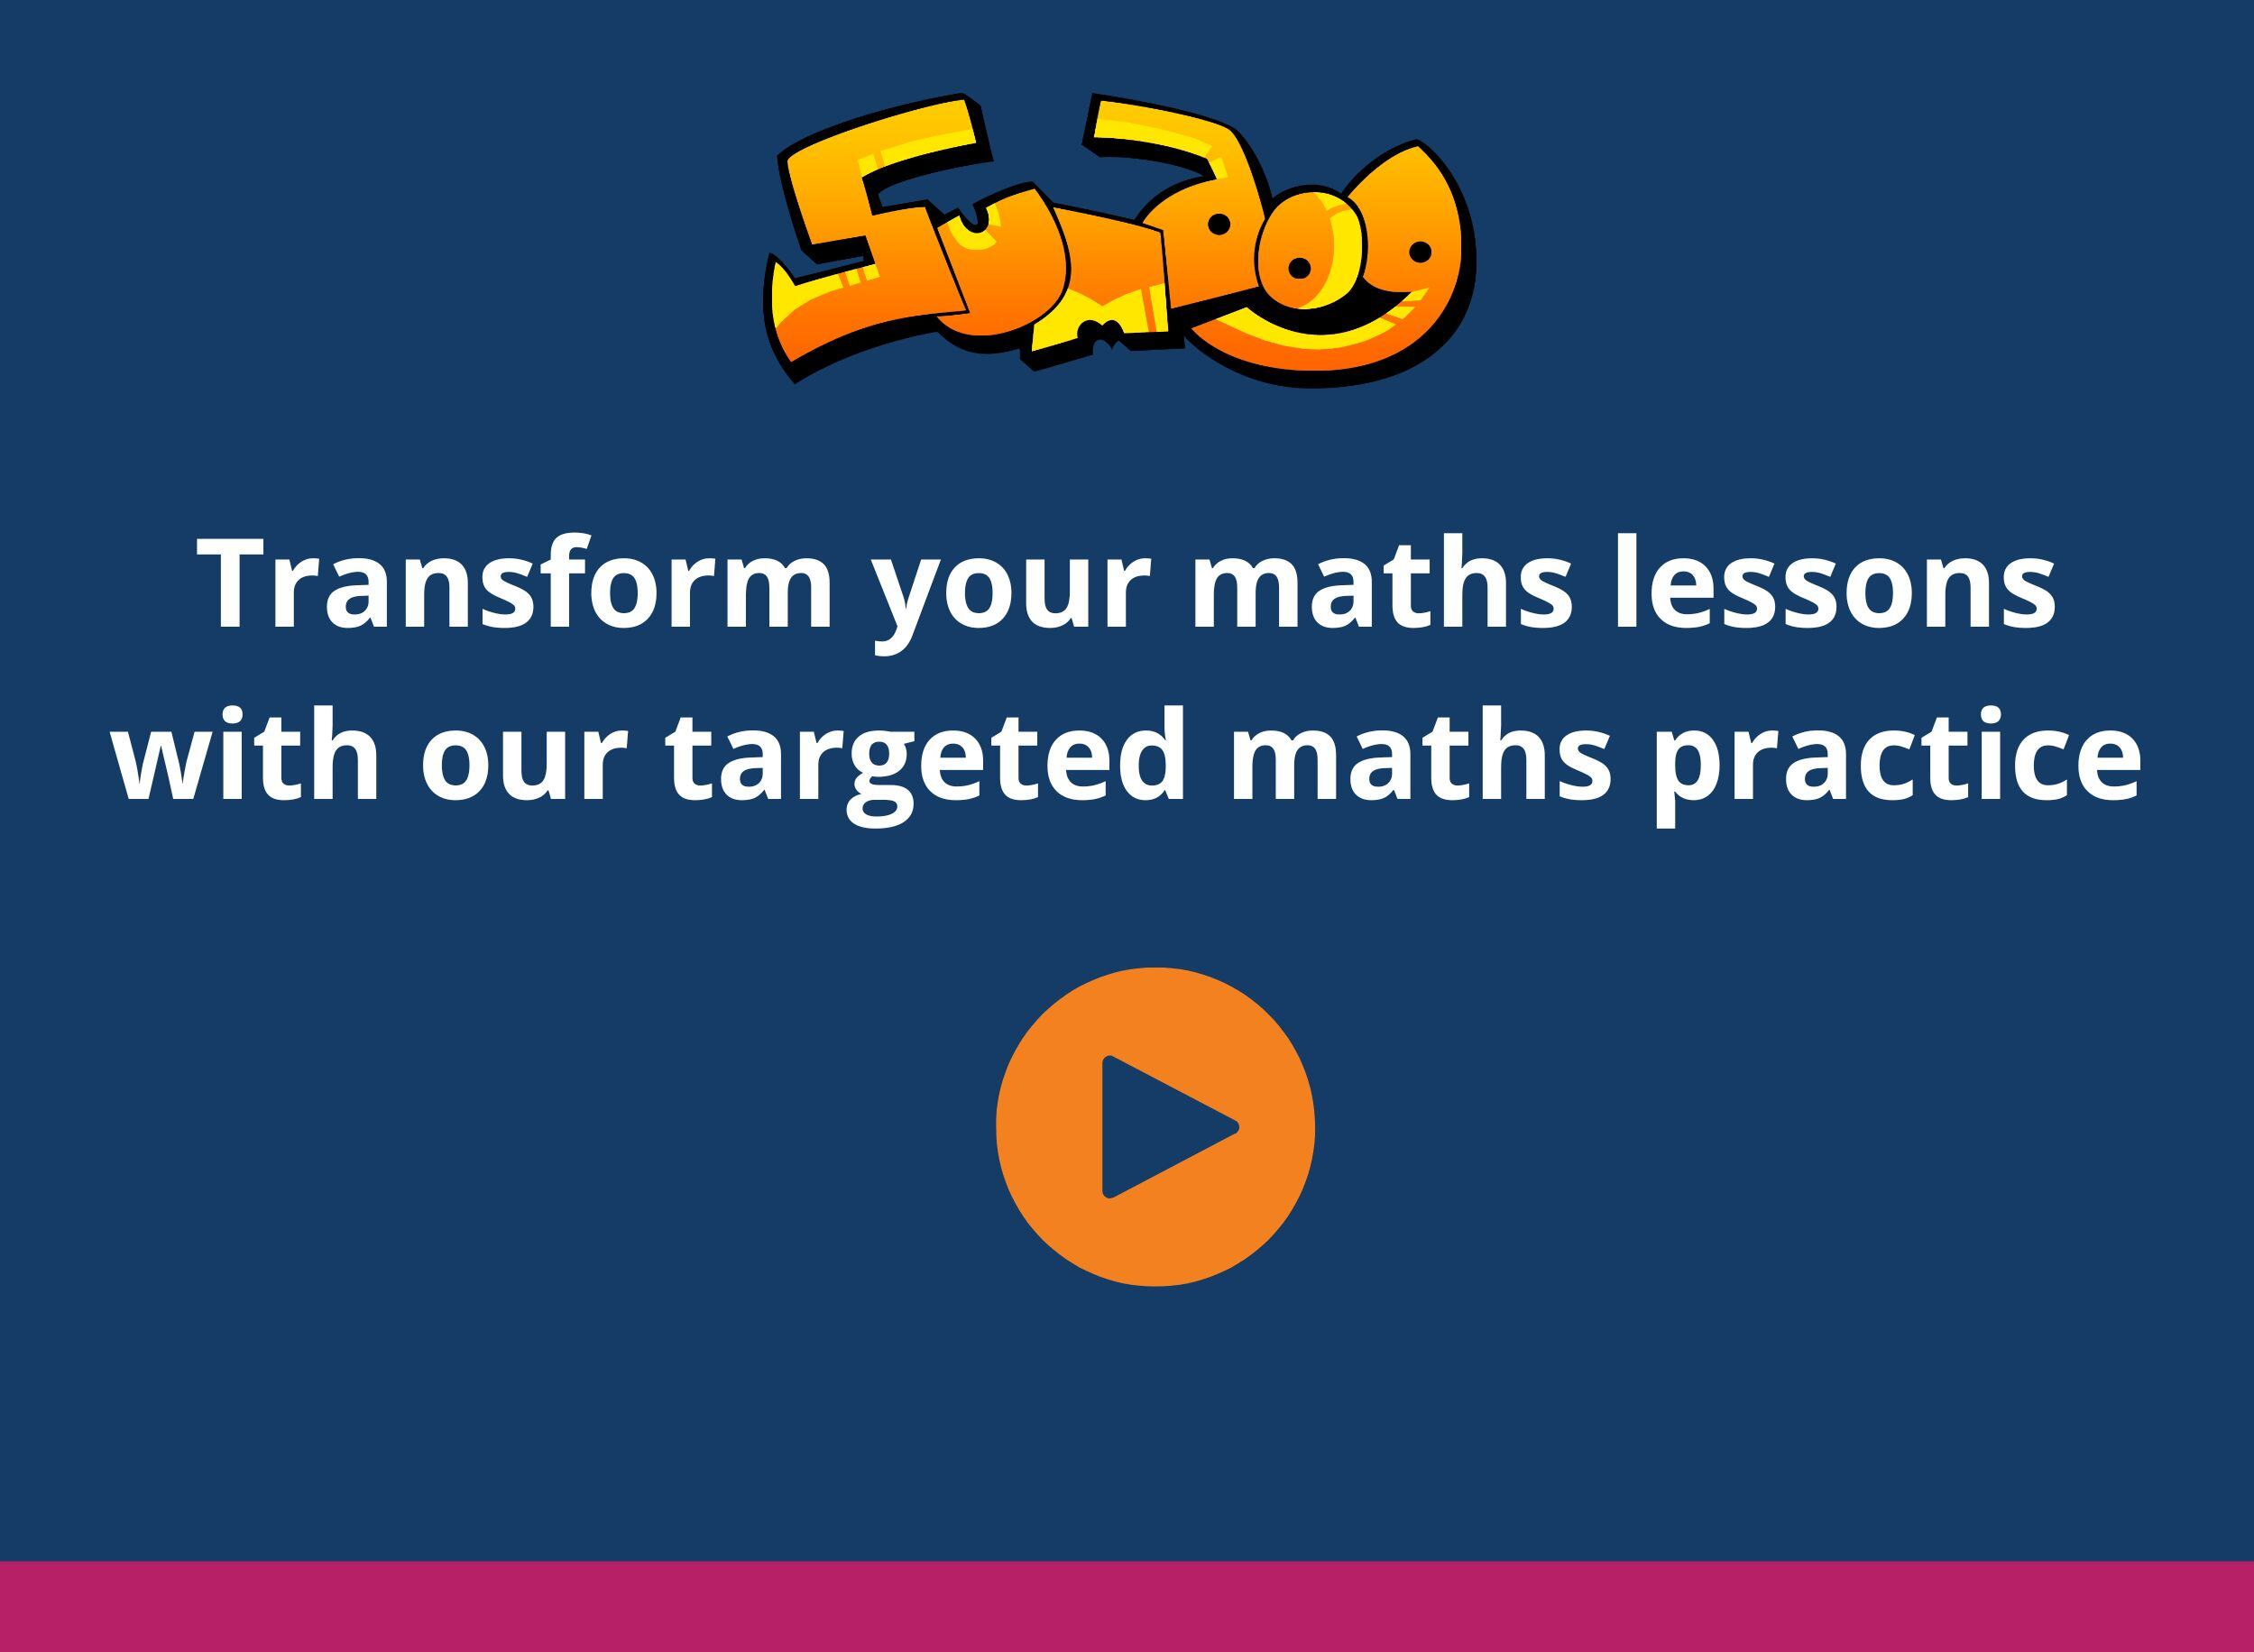 Transform your maths lessons with our targeted maths practice